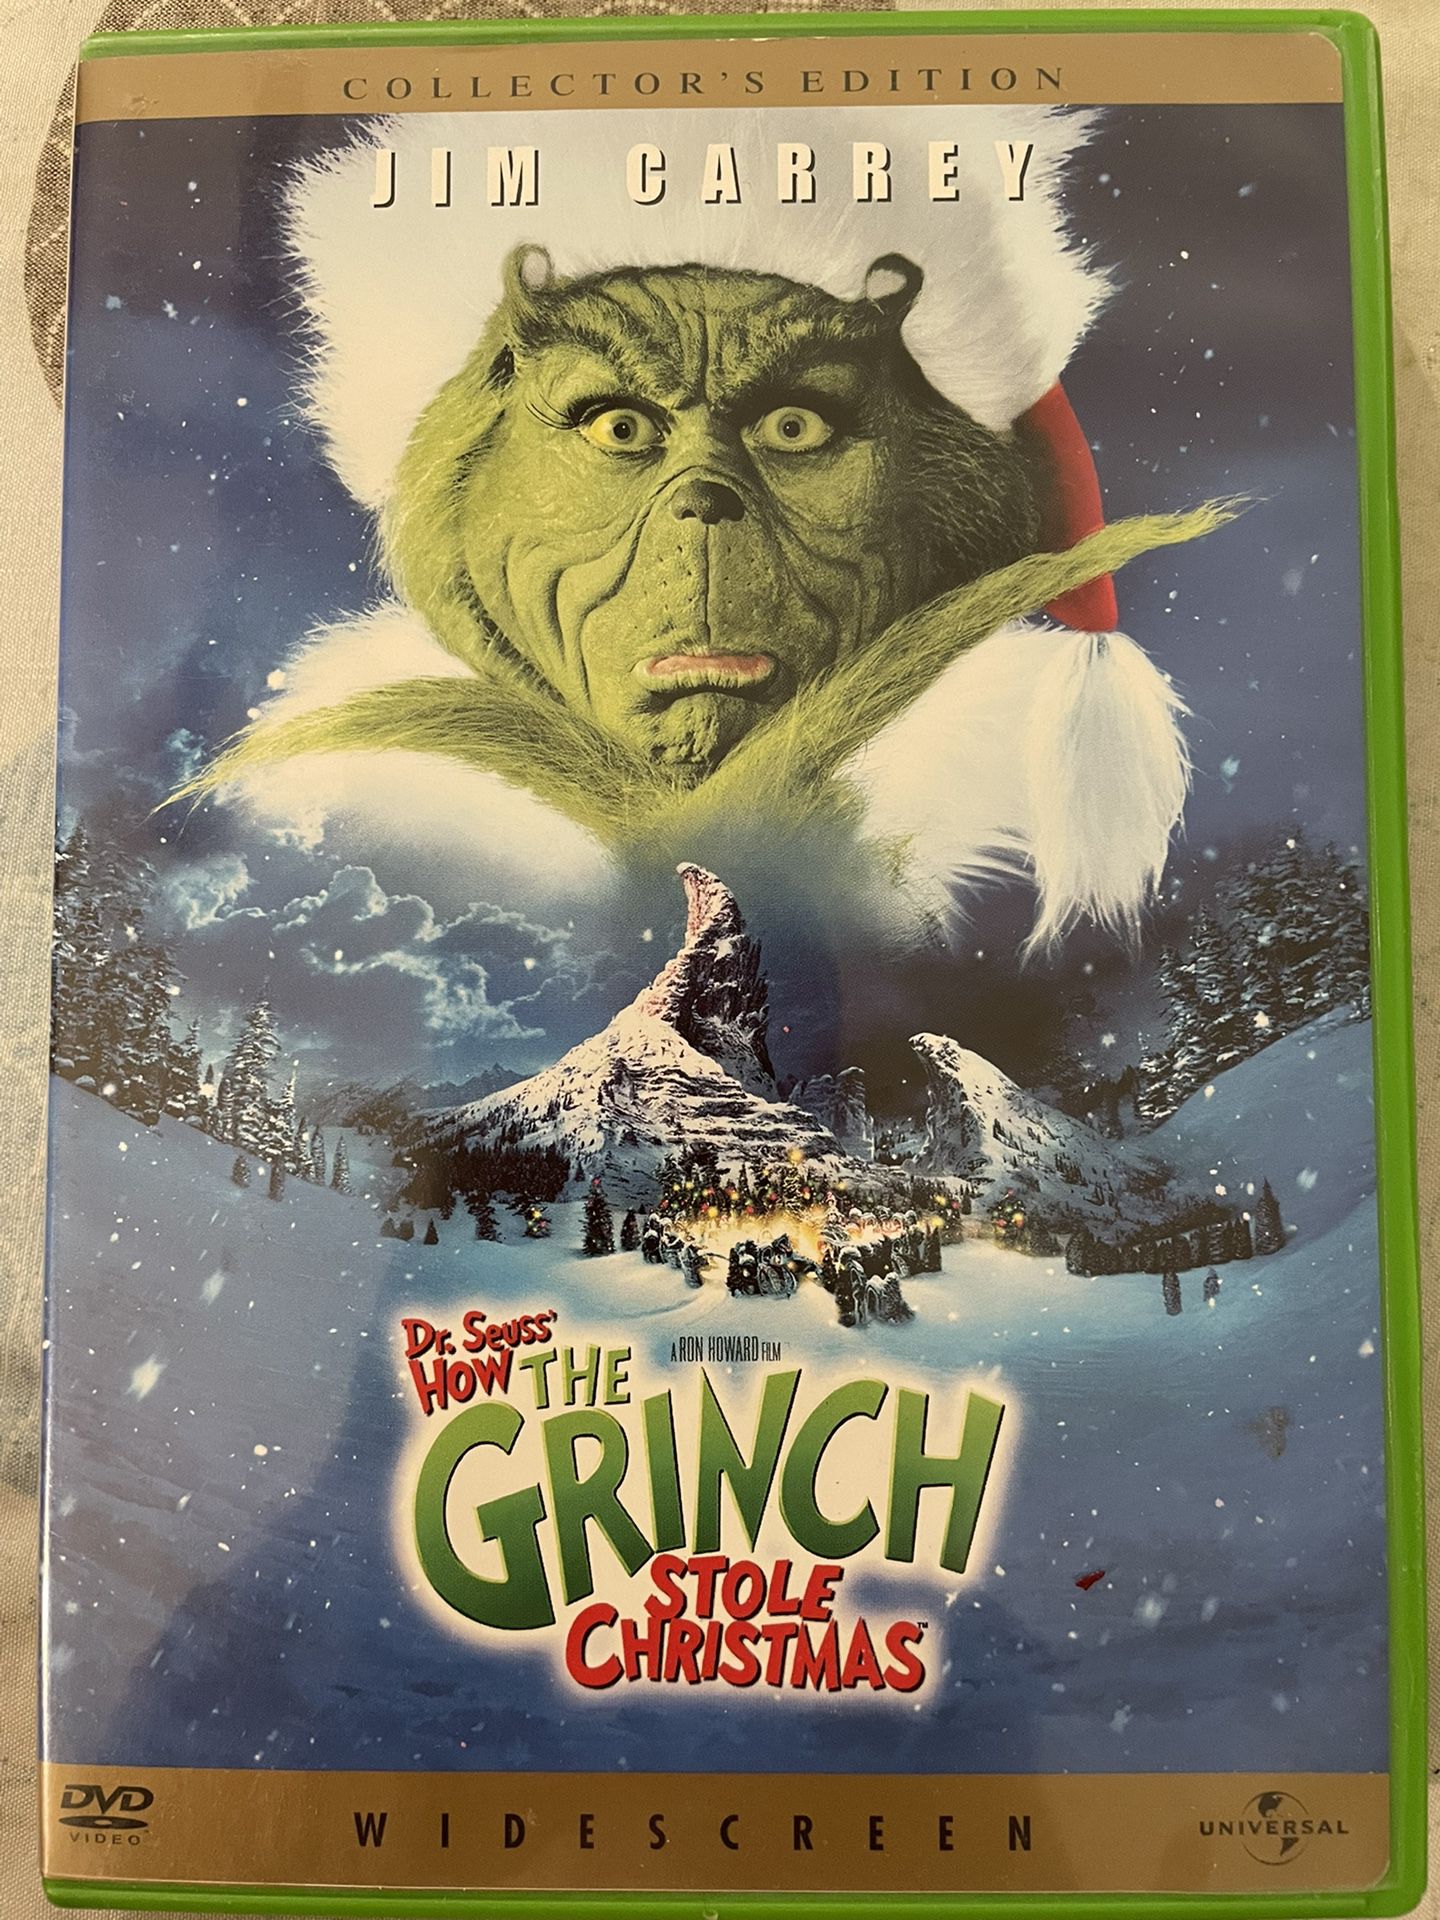 DR. SEUSS’ HOW THE GRINCH STOLE CHRISTMAS (DVD) WIDESCREEN COLLECTORS EDITION 